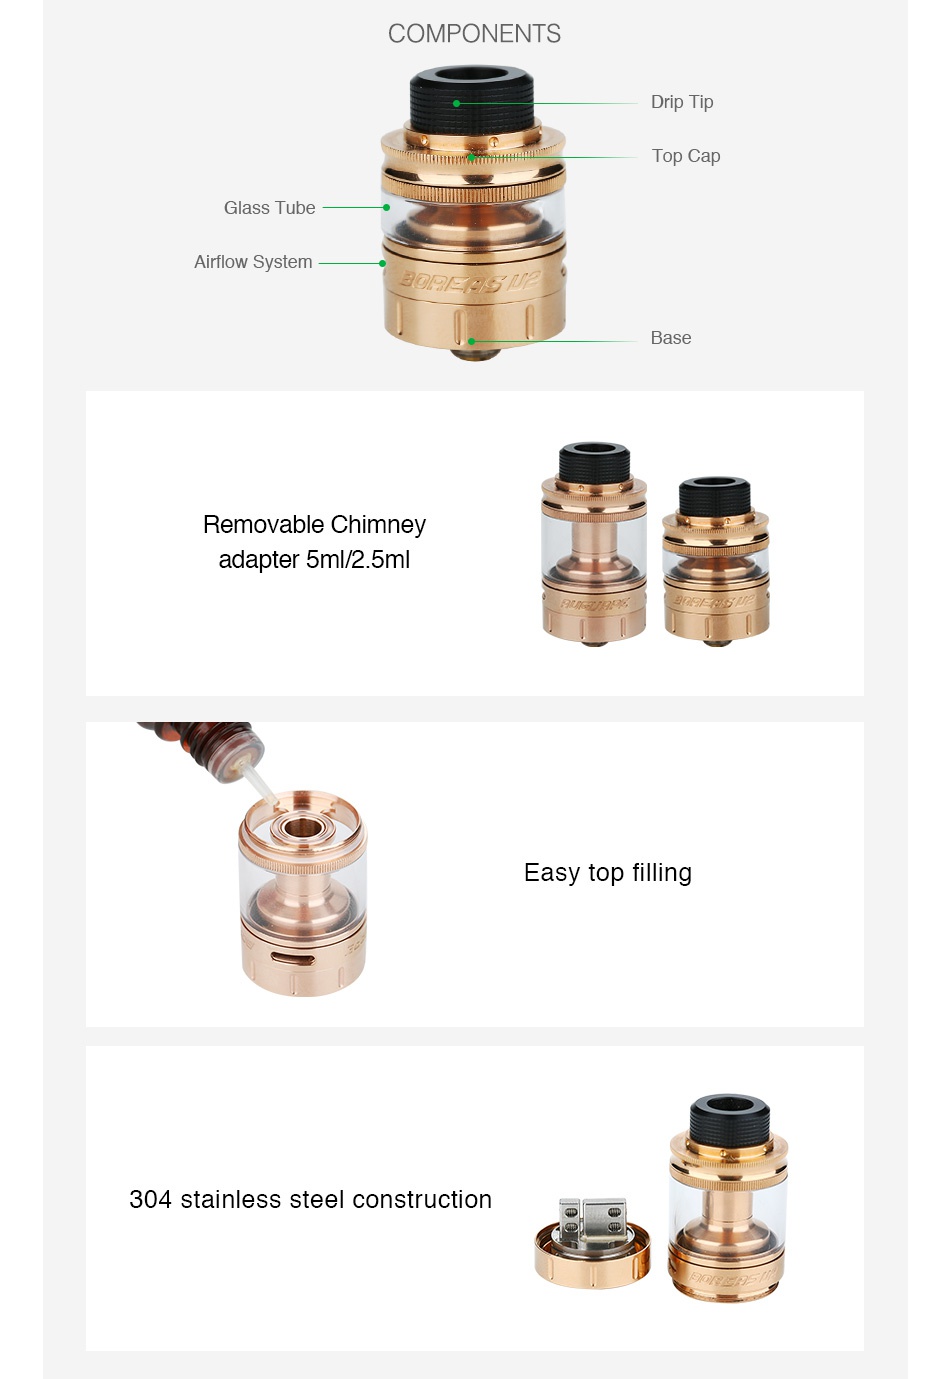 AUGVAPE Boreas V2 RTA 5ml COMPONENTS Drip Tip Glass tub Airflow System Base Removable Chimney adapter 5m 2  5m Easy top filling 304 stainless steel construction